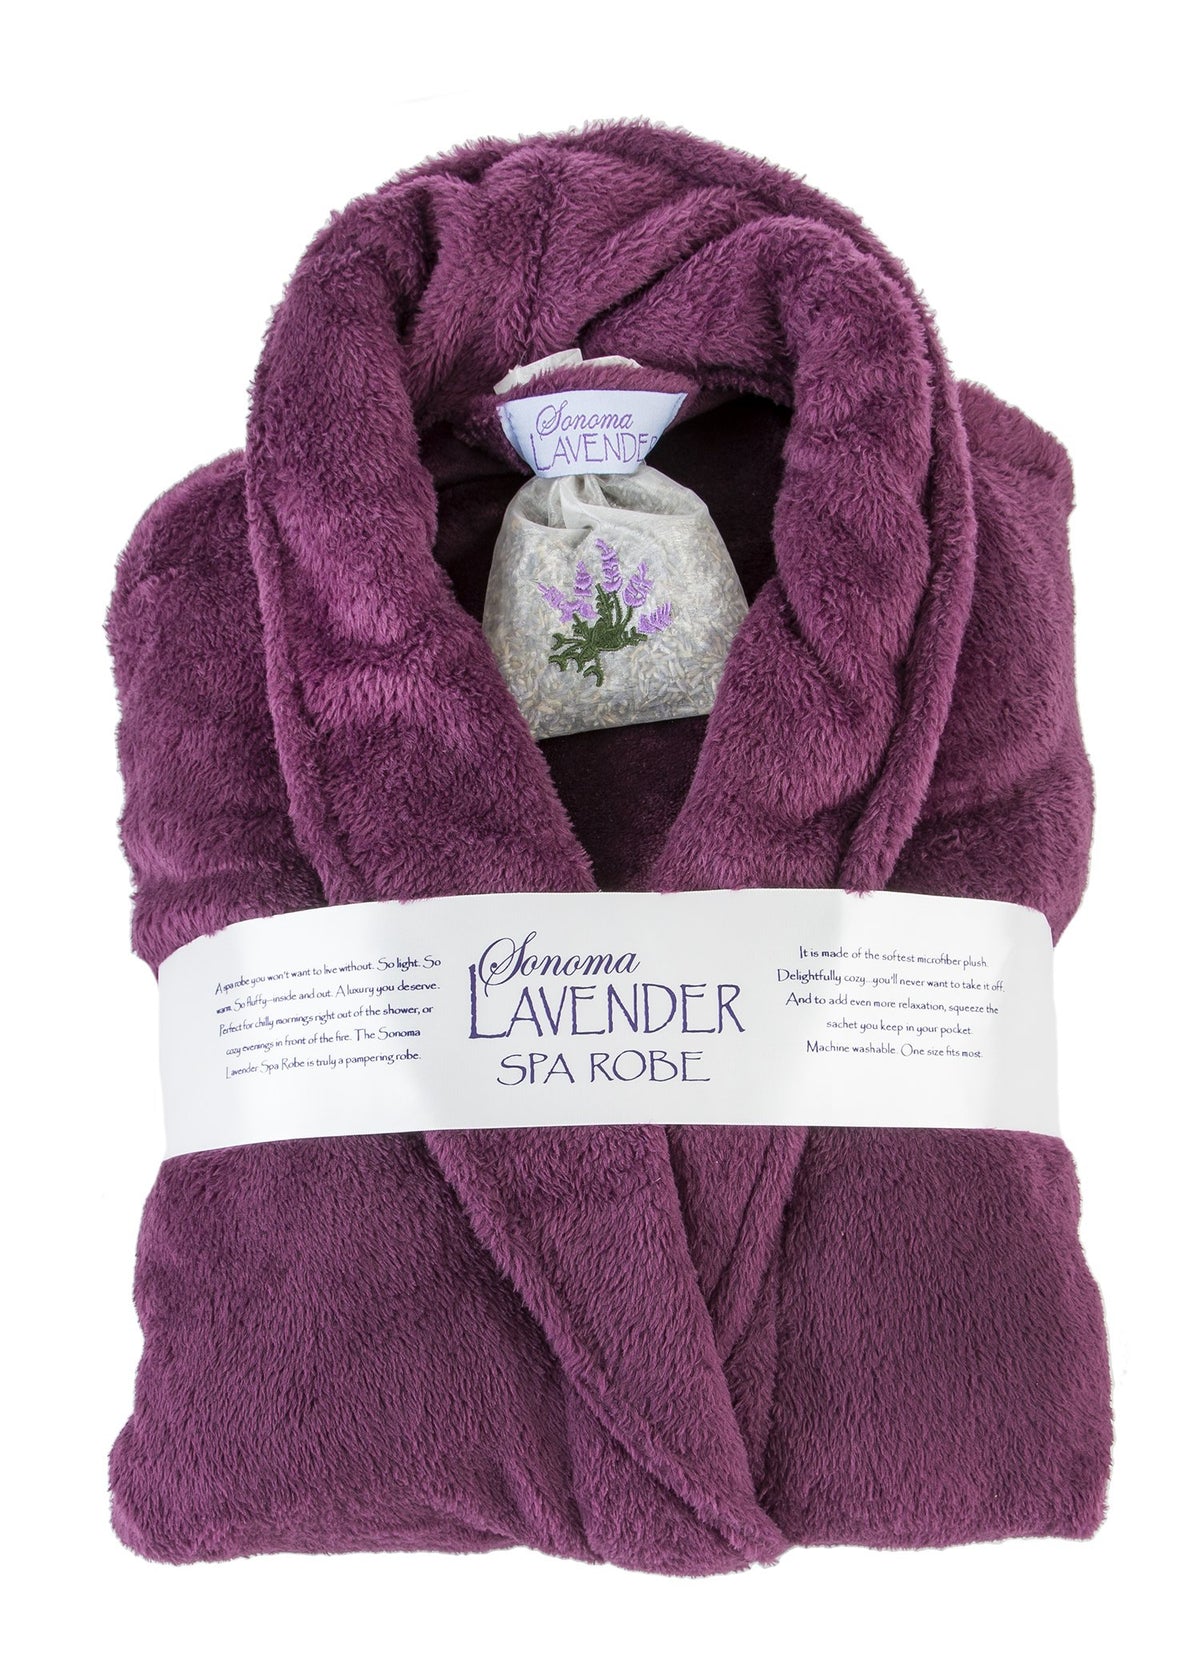 Purple luxuriously soft robe neatly folded with a white label around it reading "Sonoma Lavender Ultra-luxe Robe - Plum," and a logo of lavender flowers on the collar label.